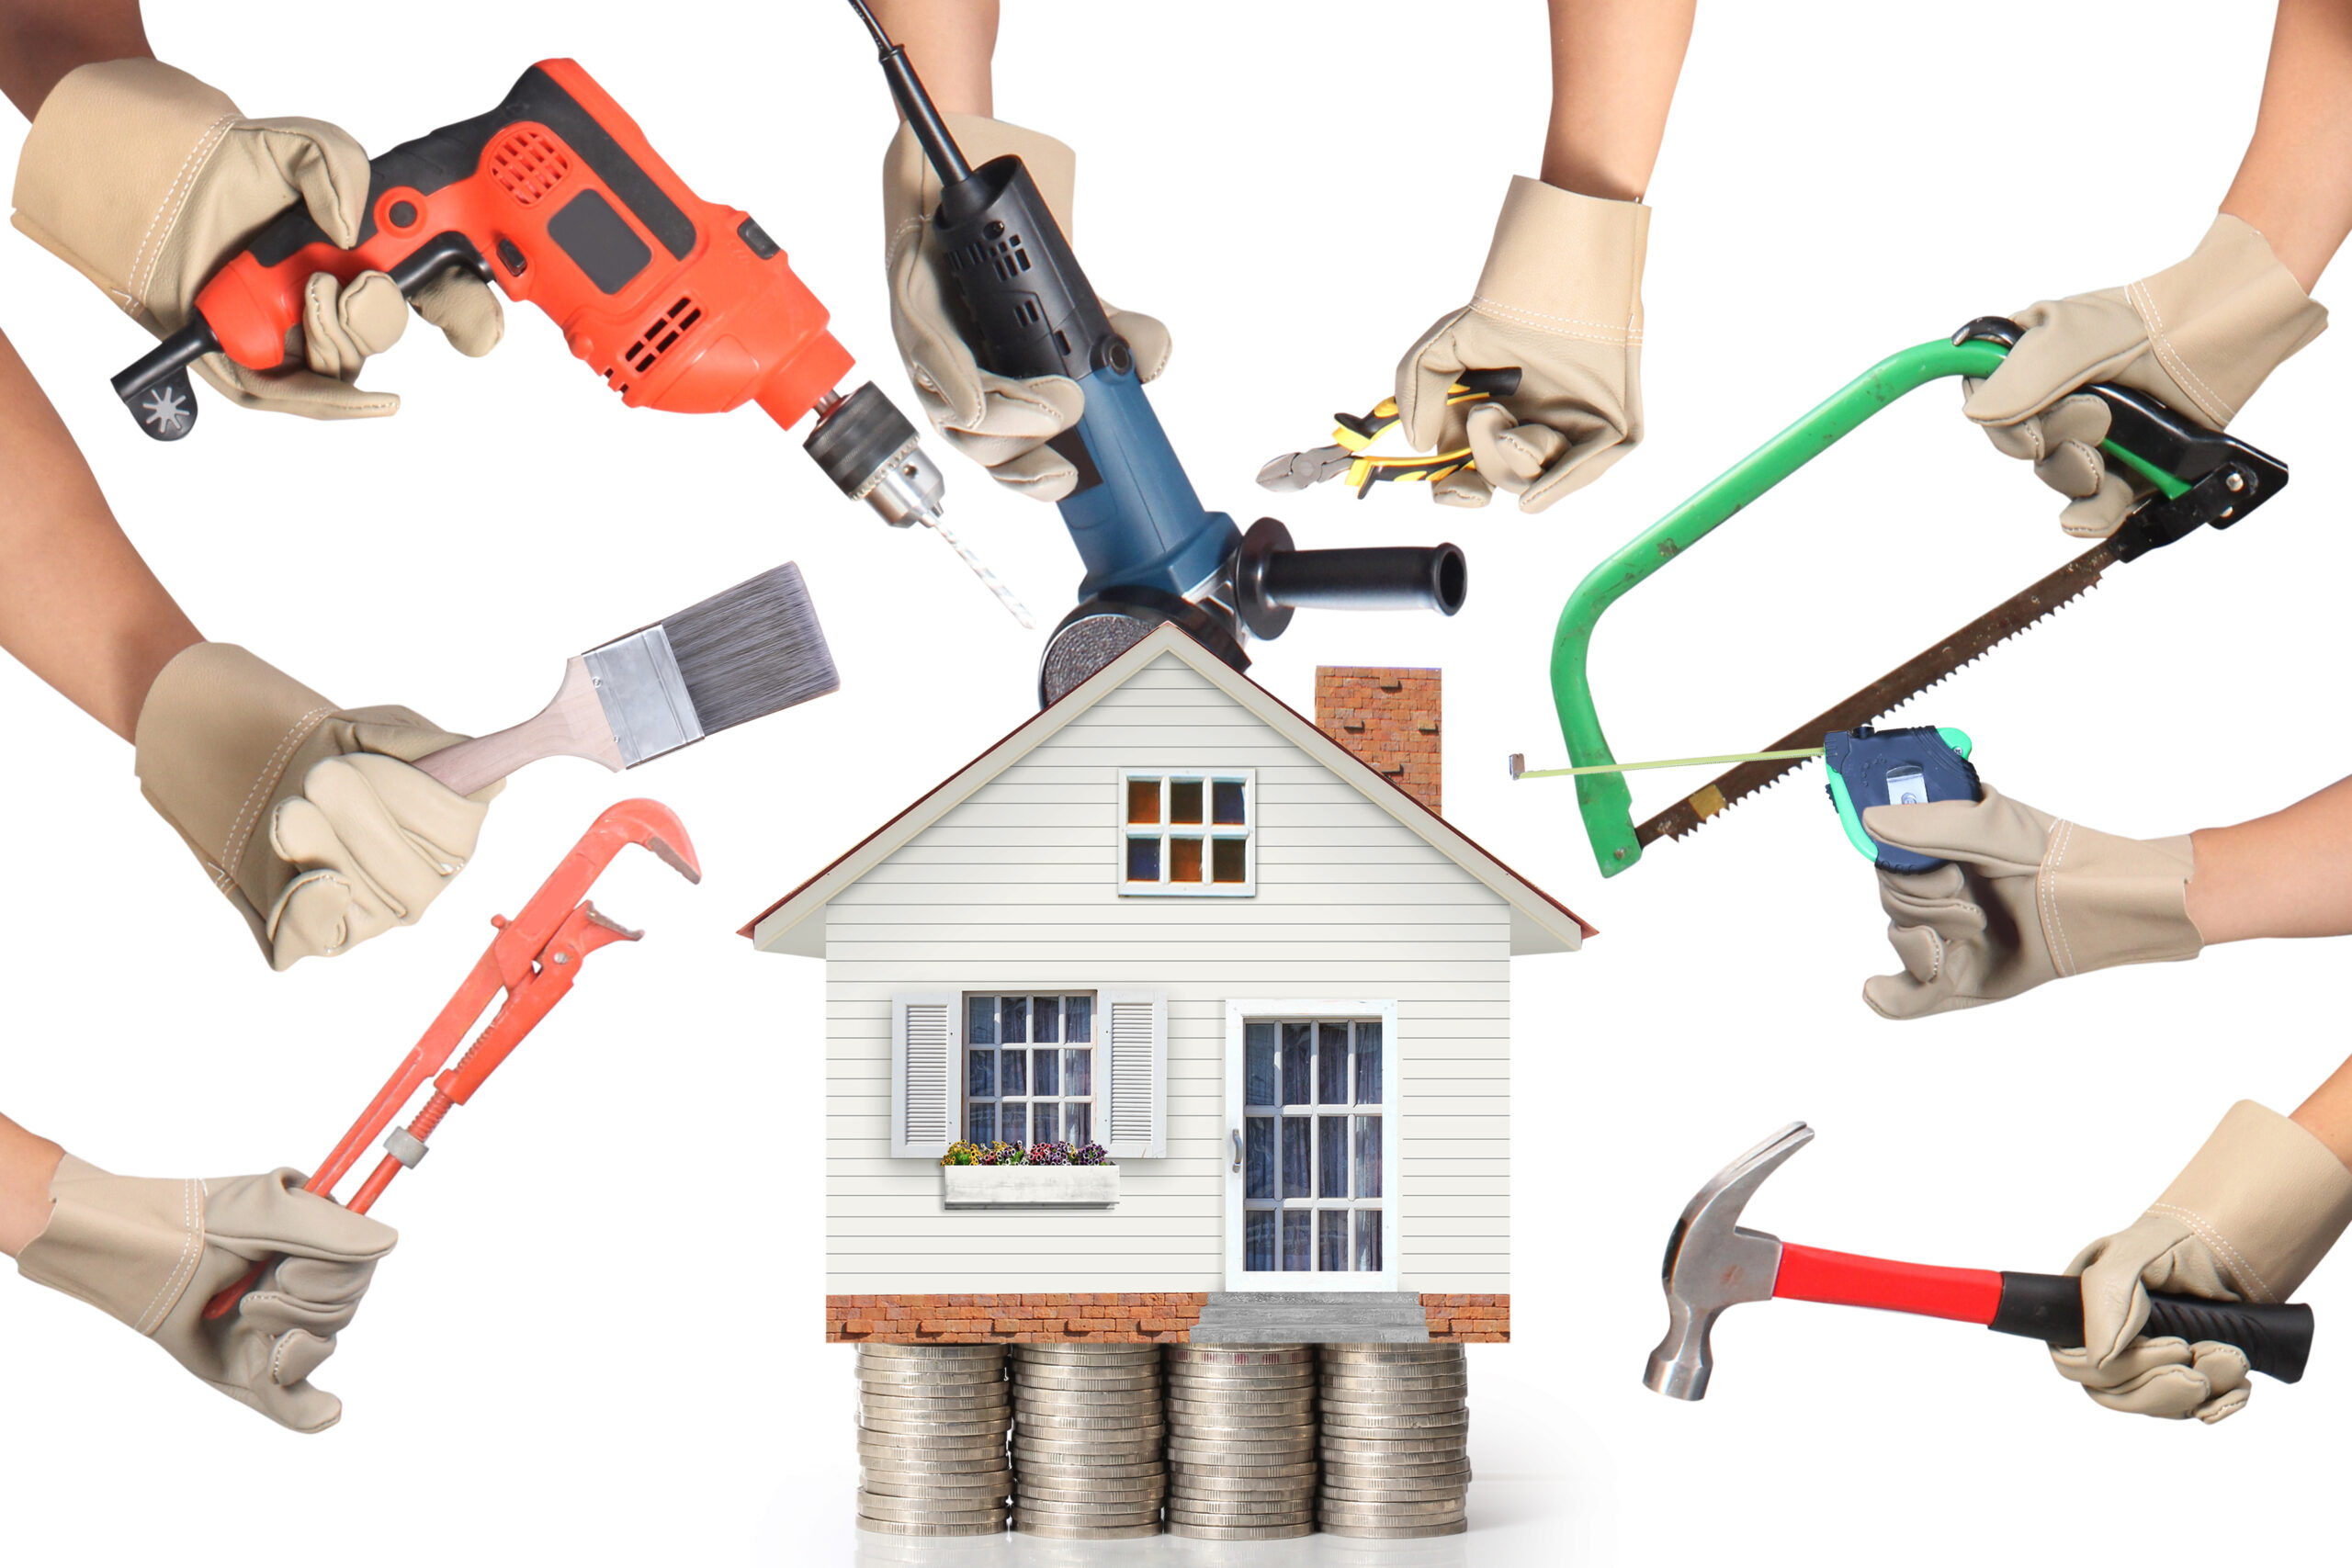 Home Improvement: The Basics of Home Repair and Maintenance